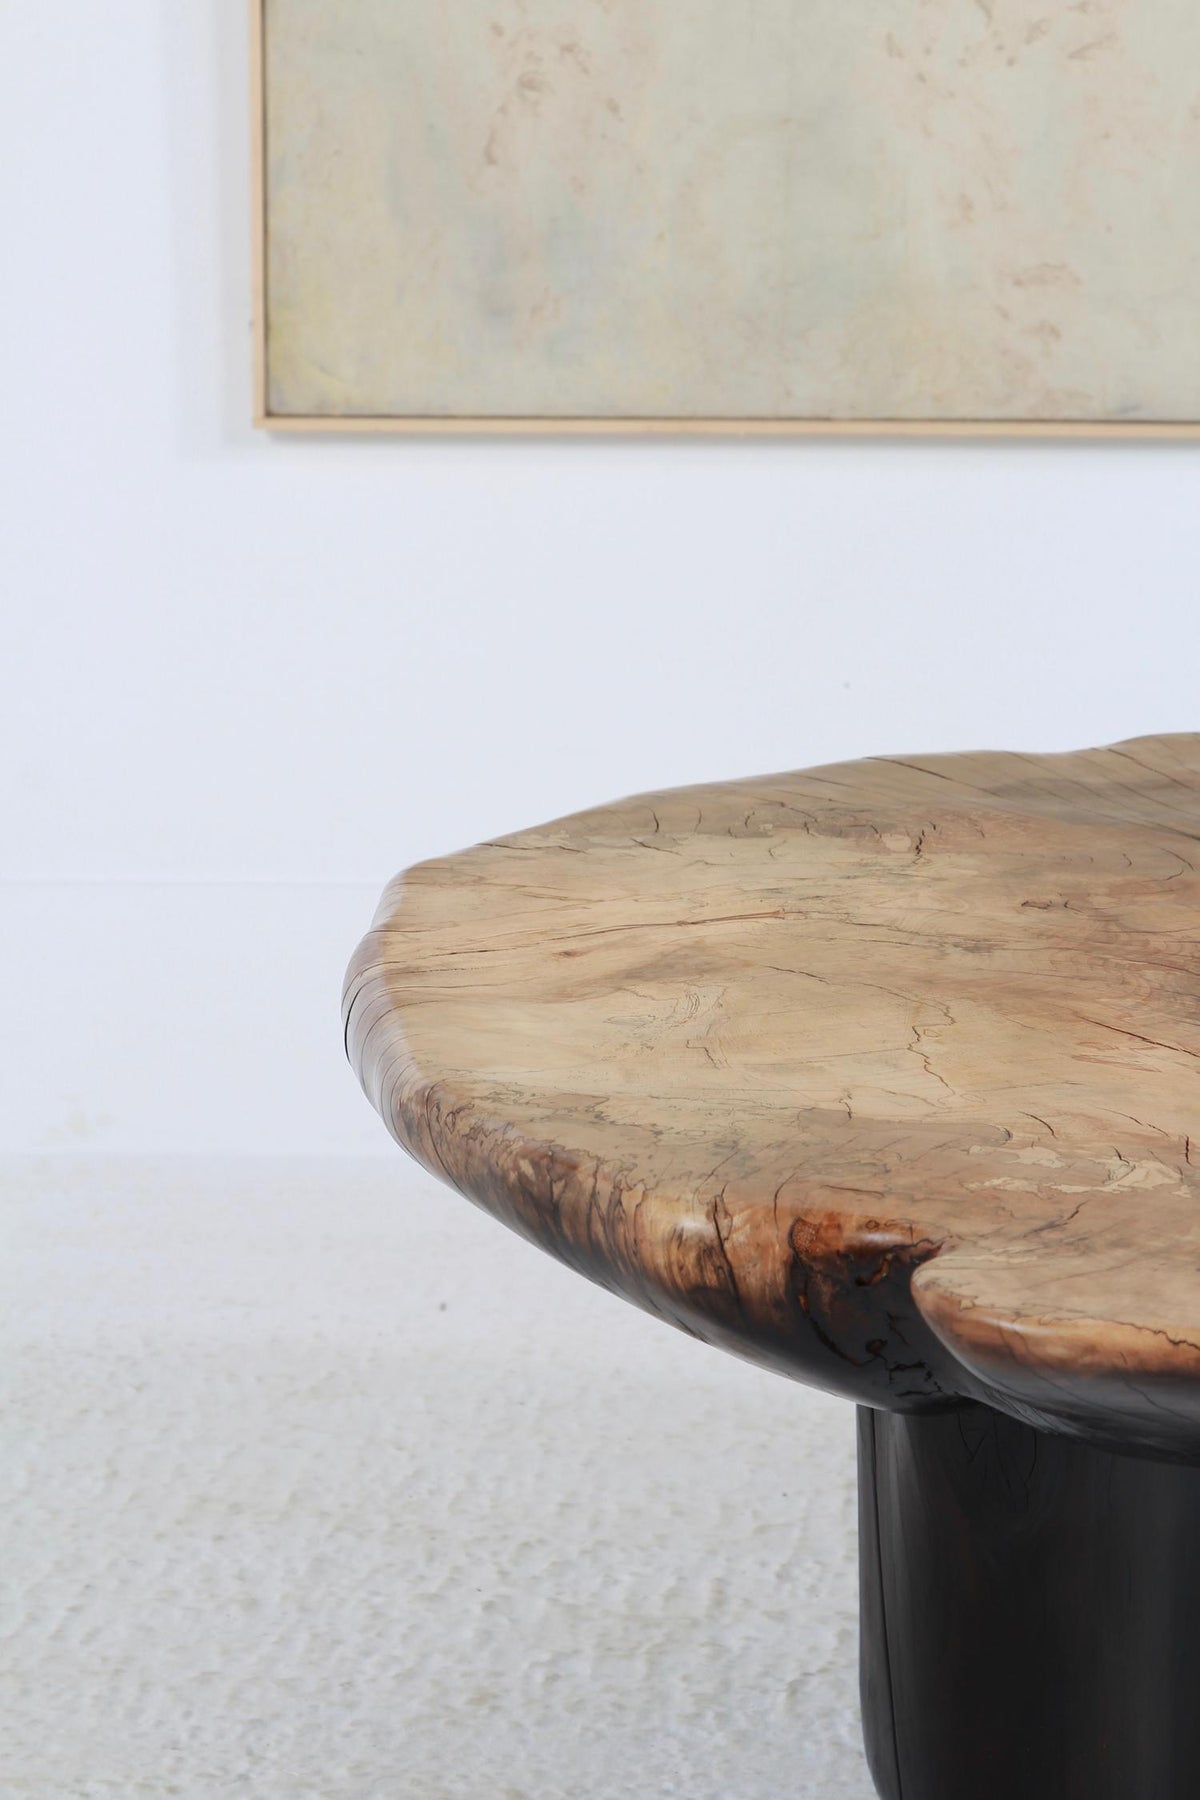 HUGE EXPRESSIVE SCULPTURAL CRAFTSMAN BEECH & CYPRESS PEBBLE COFFEE TABLE WITH BURNT WOOD BASE.PRICE ON REQUEST